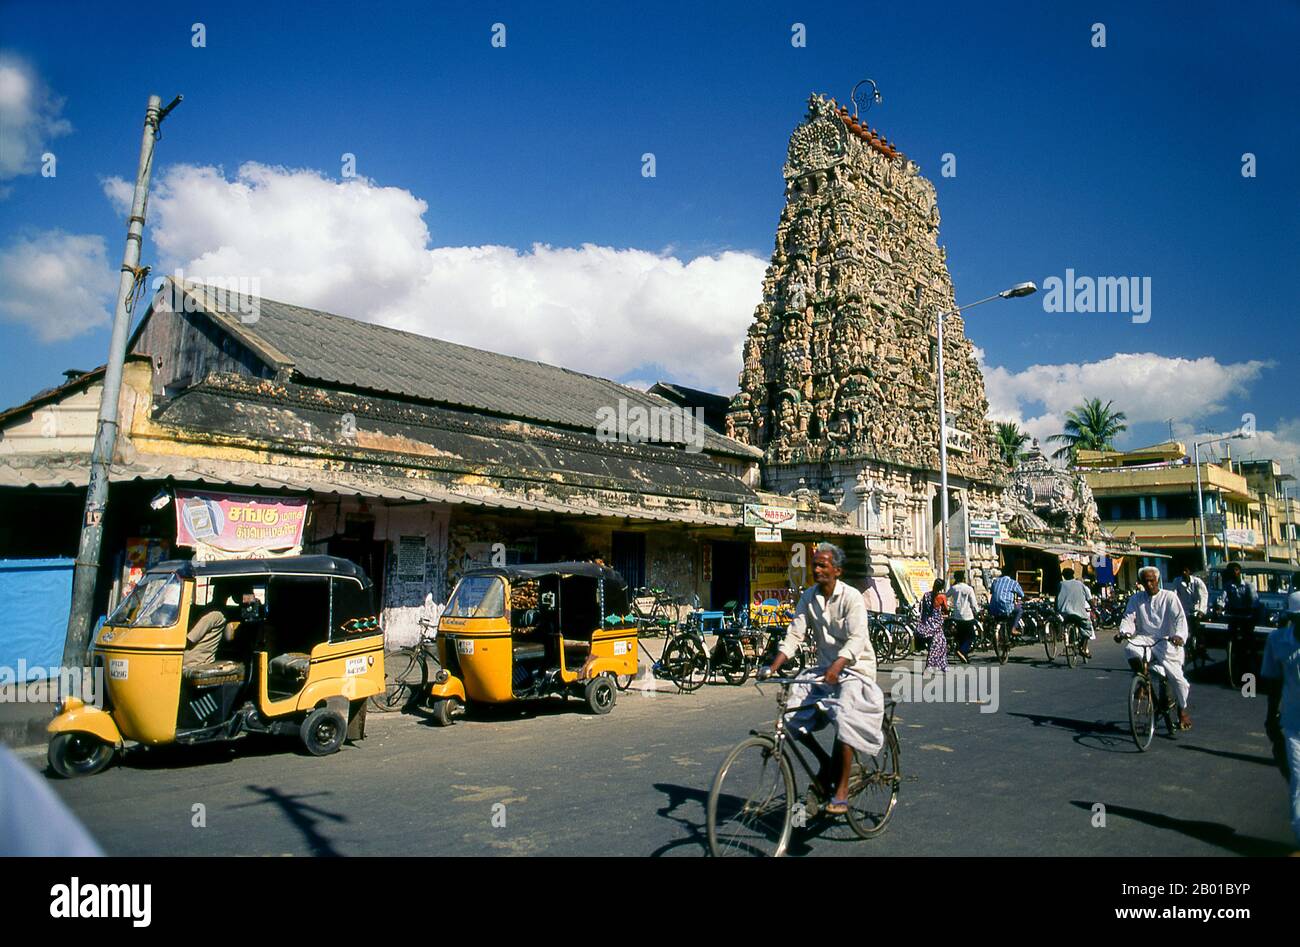 India: Elaborately carved gopuram of a Pondicherry Hindu temple.  Pondicherry was the capital of the former French territories in India. Besides Pondi itself – acquired from a local ruler in 1674 – these included Chandernagore in Bengal (1690); Mahé in Kerala (1725); Yanam in Andhra Pradesh (1731); and Karaikal in Tamil Nadu (1739). Chandernagore was returned to India three years after independence, in 1951, and was absorbed into West Bengal. Returned to India in 1956, the remaining four territories were constituted as the Union Territory of Pondicherry in 1962. Stock Photo